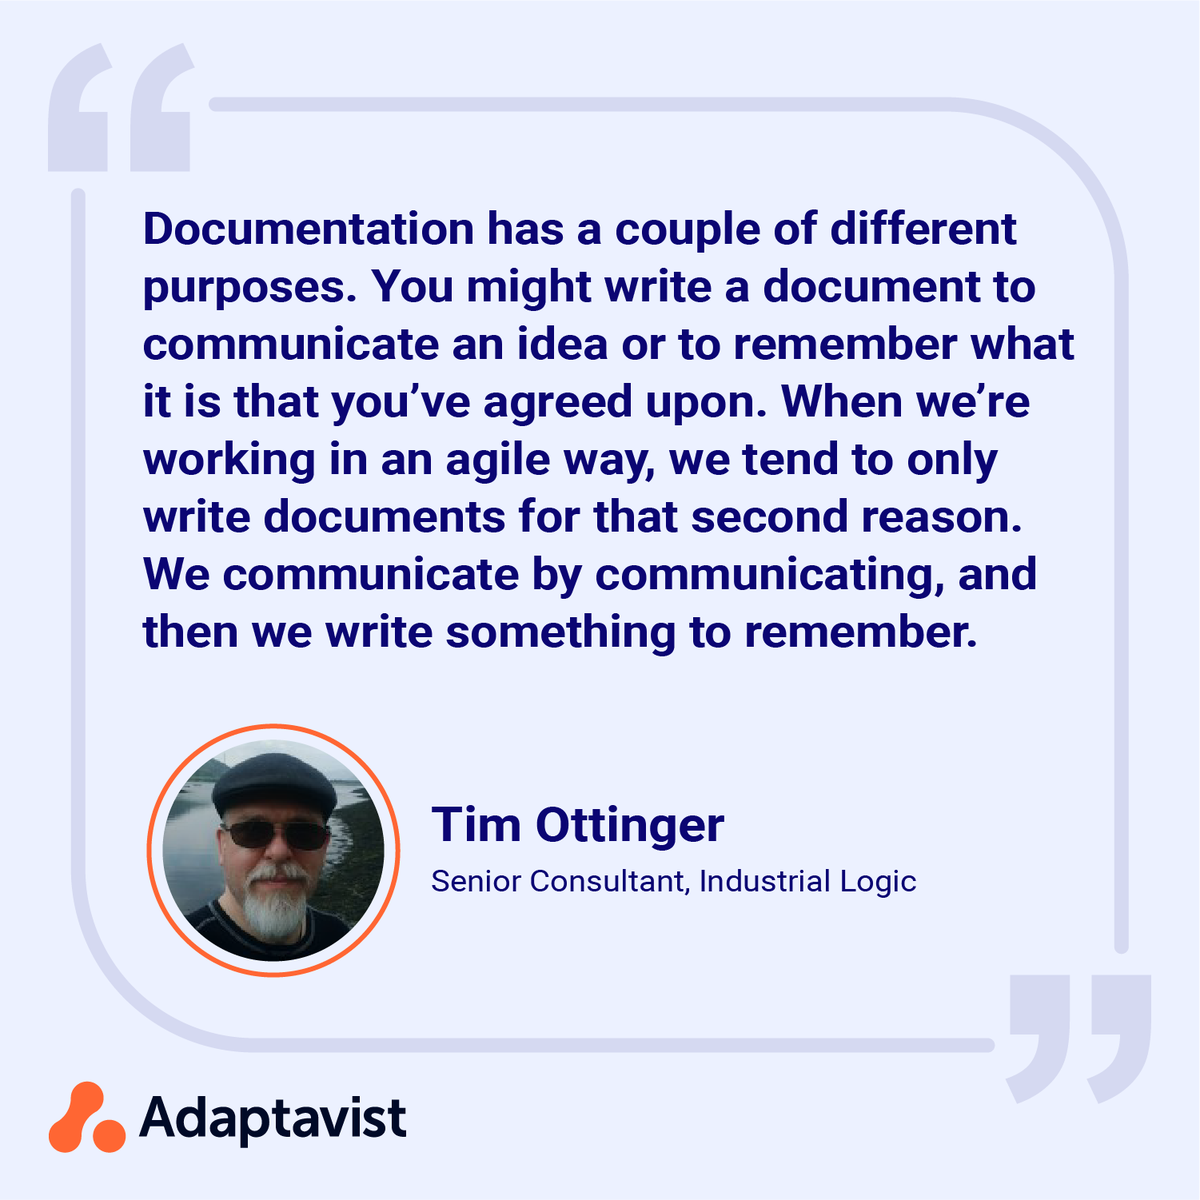 What's more important – an #agile mindset, processes, or tools? Check out the discussion between our very own Jon Kern, Digital Transformation Consultant and Co-author of the Agile Manifesto, and Tim Ottinger, Senior Consultant at Industrial Logic. ⬇️ bit.ly/3Tu5kOB